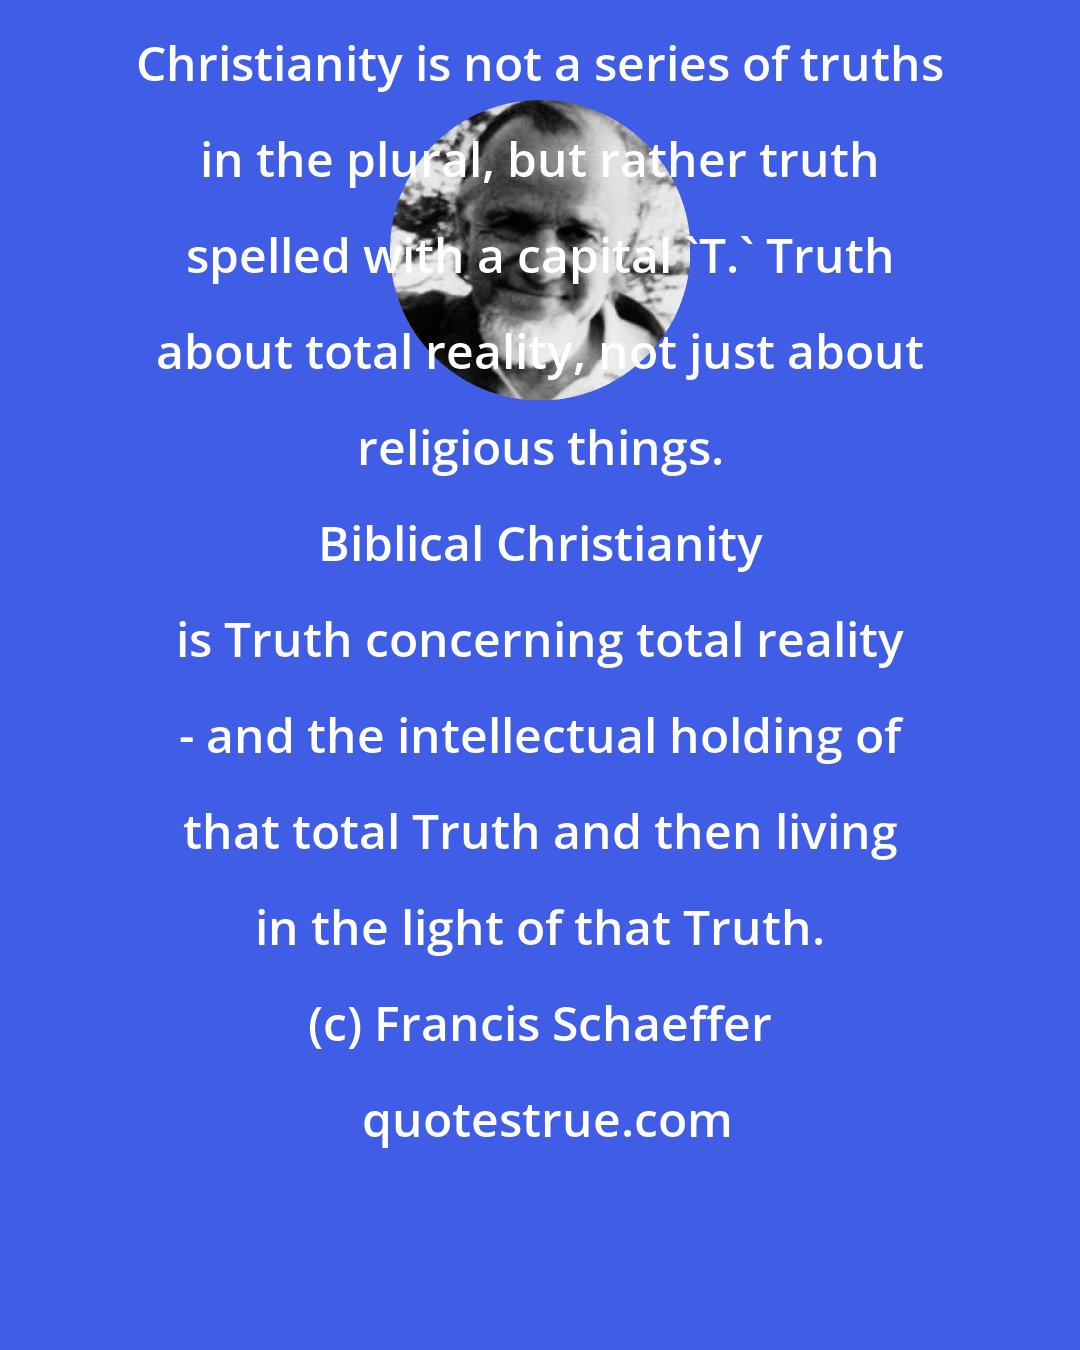 Francis Schaeffer: Christianity is not a series of truths in the plural, but rather truth spelled with a capital 'T.' Truth about total reality, not just about religious things. 
 
 Biblical Christianity is Truth concerning total reality - and the intellectual holding of that total Truth and then living in the light of that Truth.